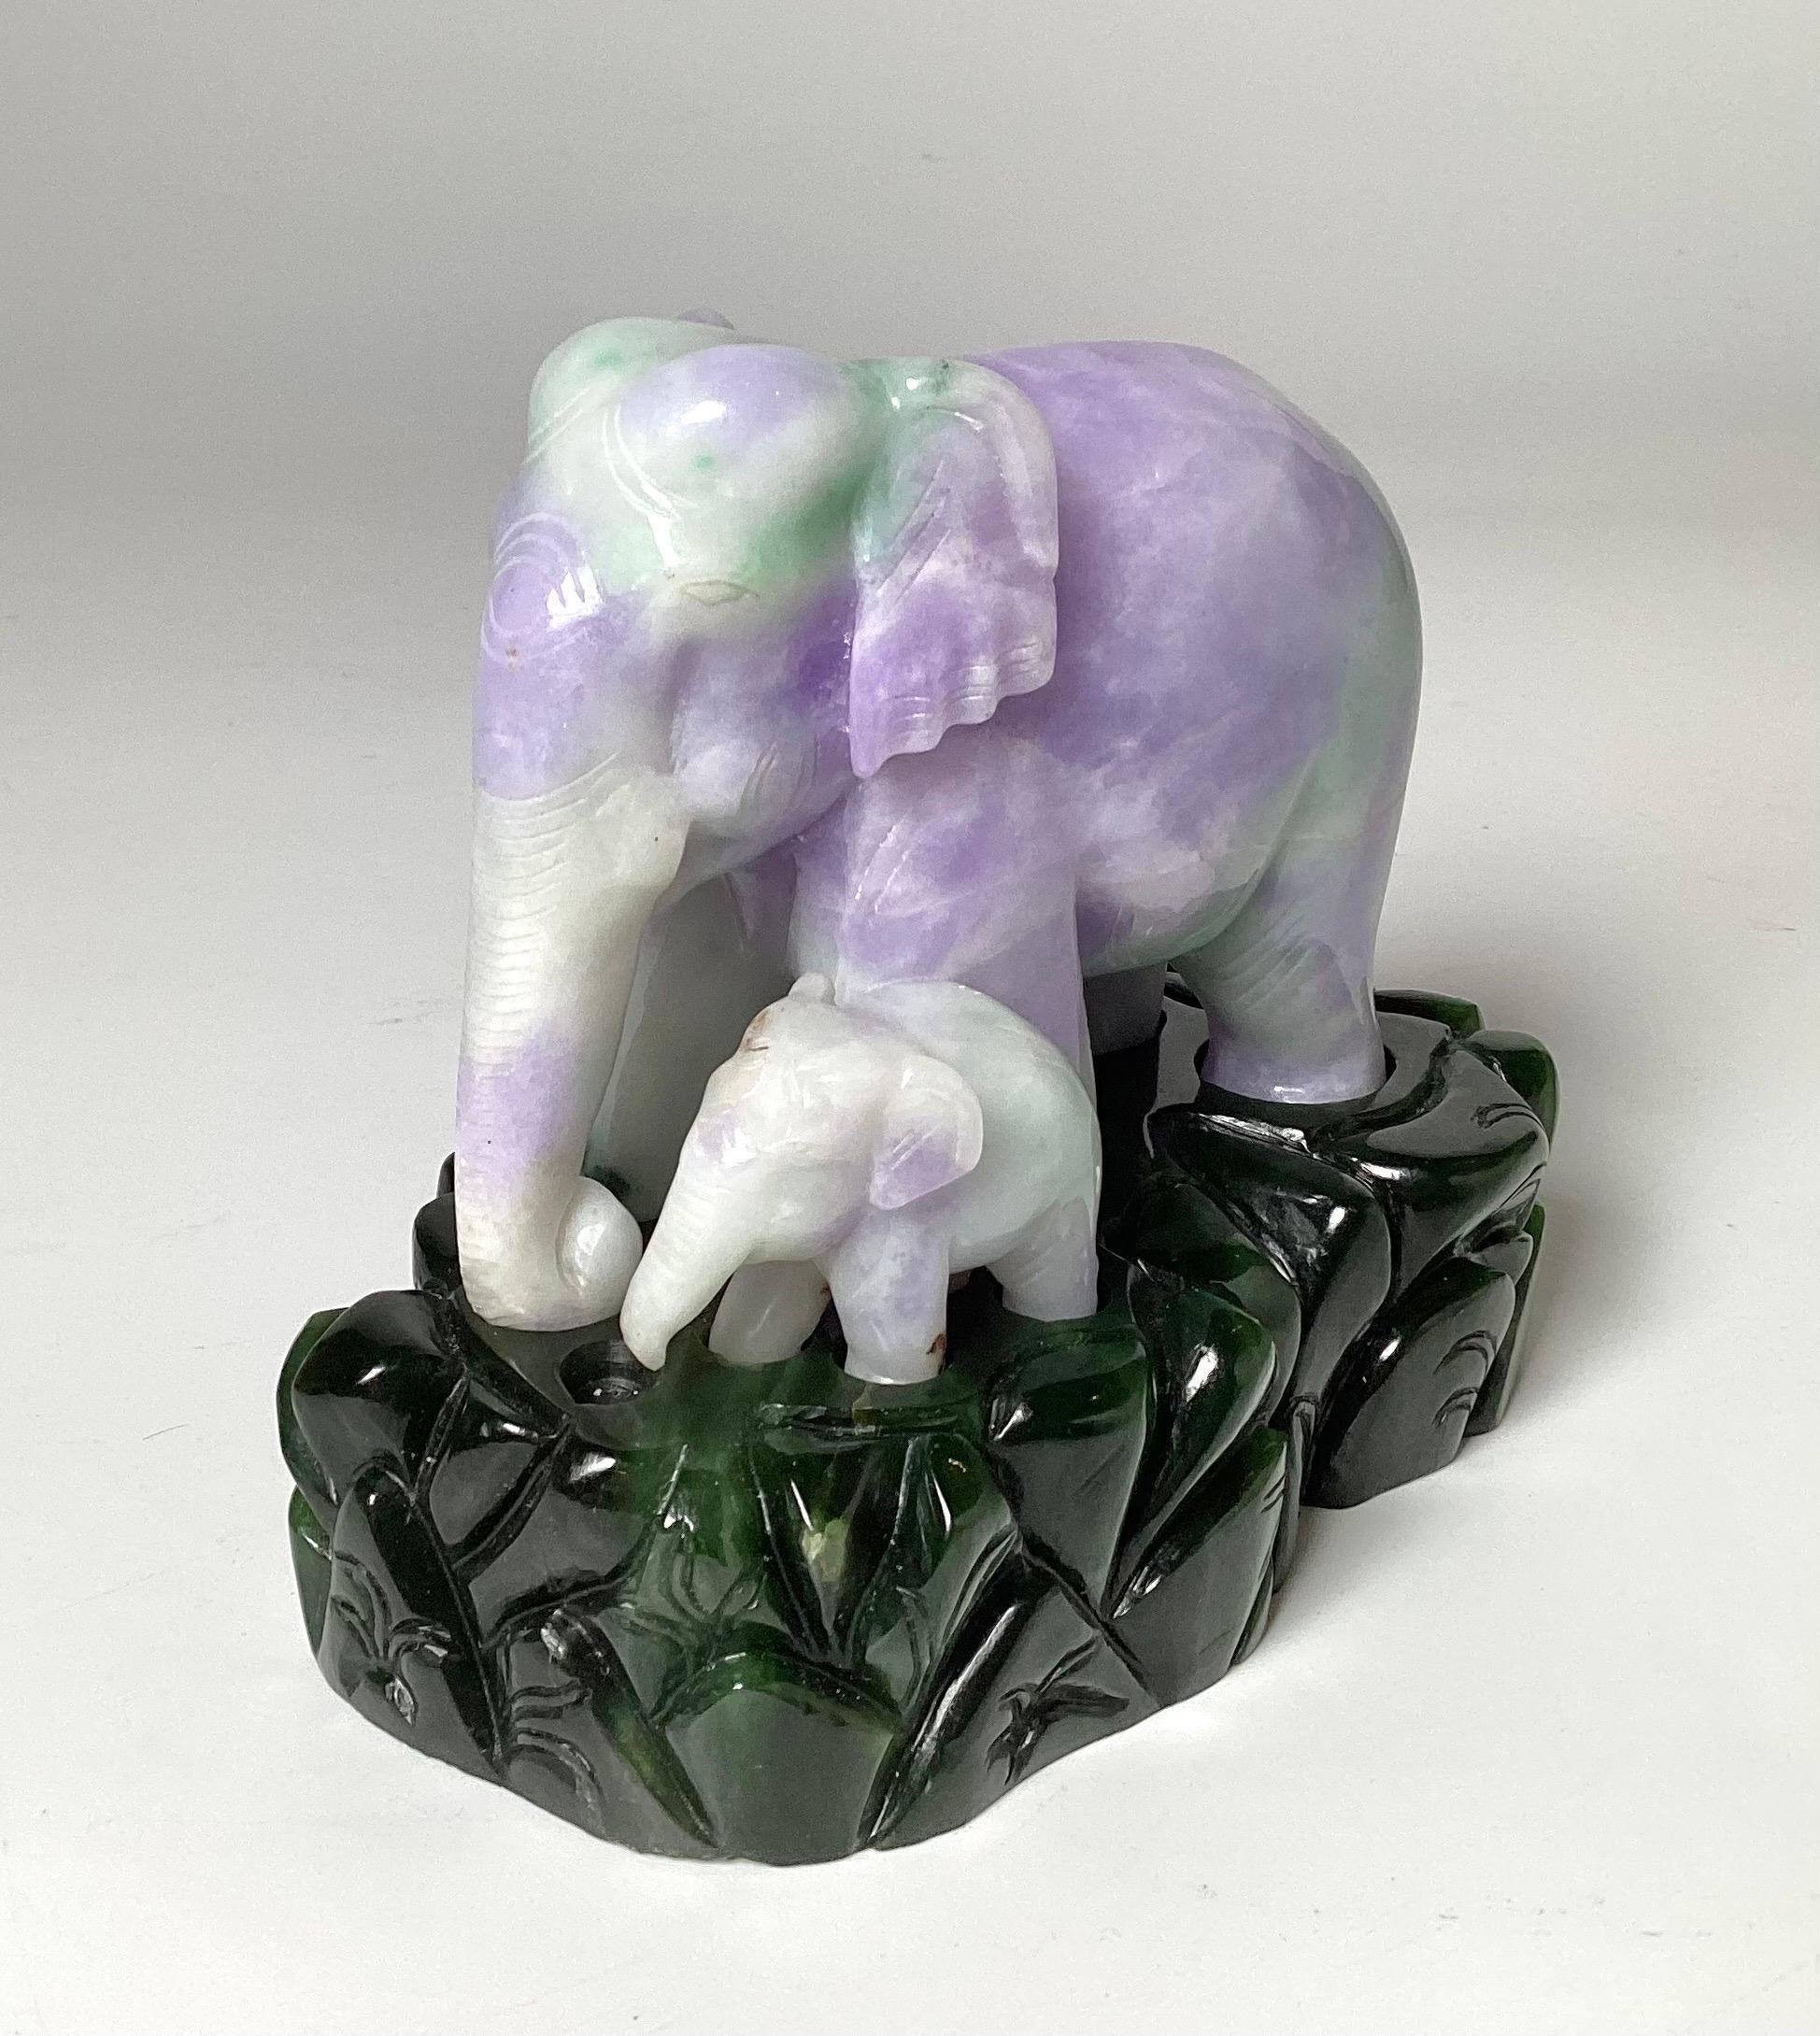 Charming carved jadeite elephant on Spinach Jade base. The hand carved elephant in apple green and lavender jade depicting a mother and her calf. The dark green base is separate and the figure rests on it. 5 inches wide, 4 inches tall, 2.5 inches